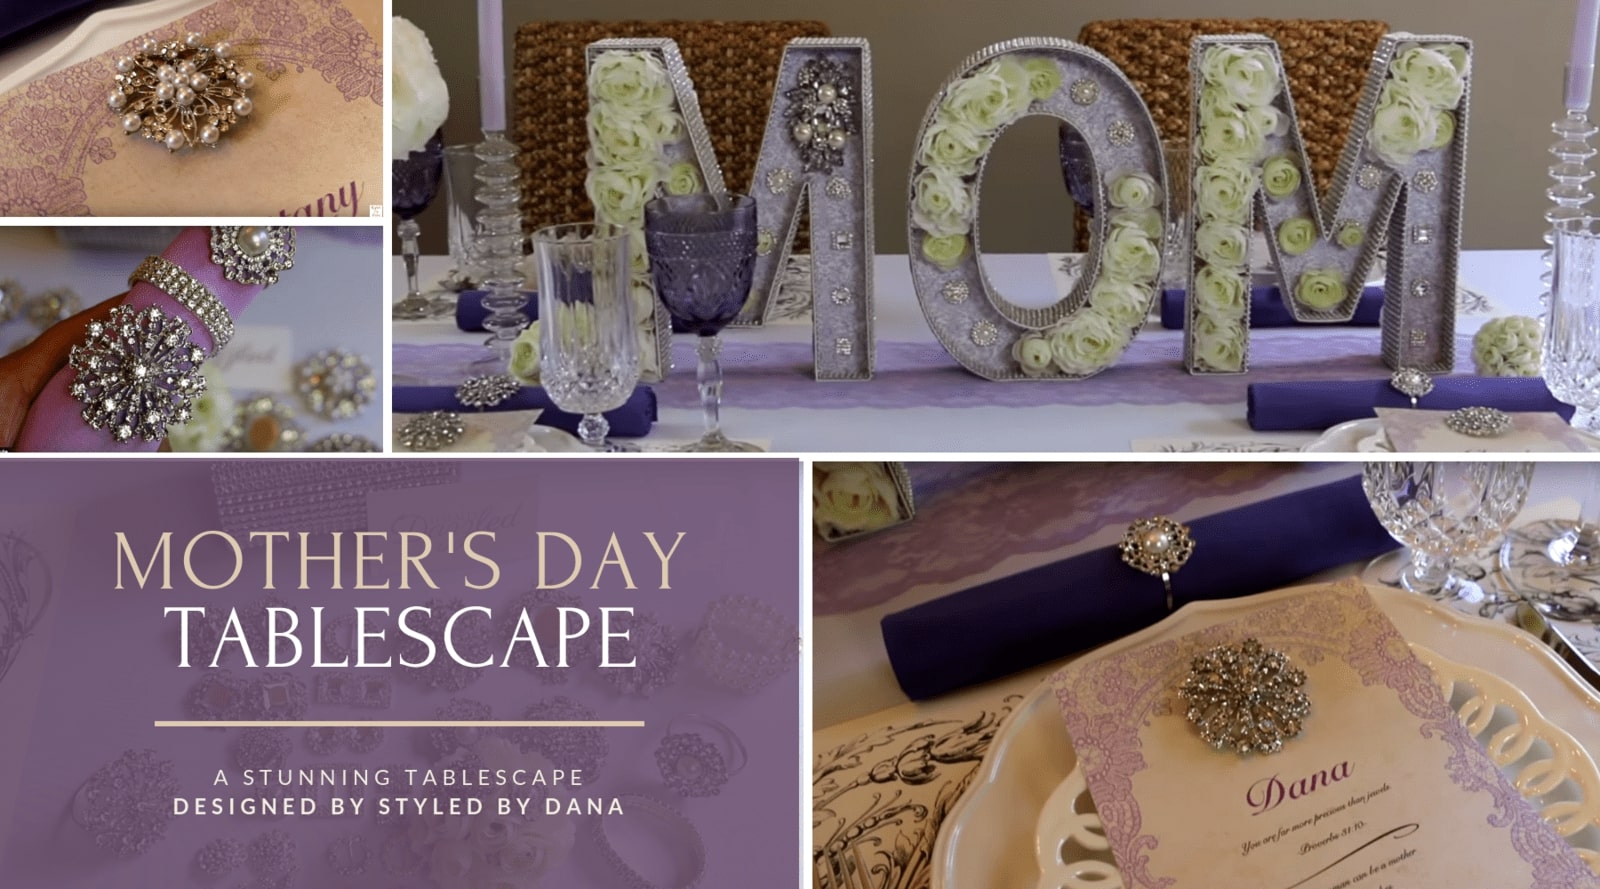 Styled by Dana Mother's Day Tablescape